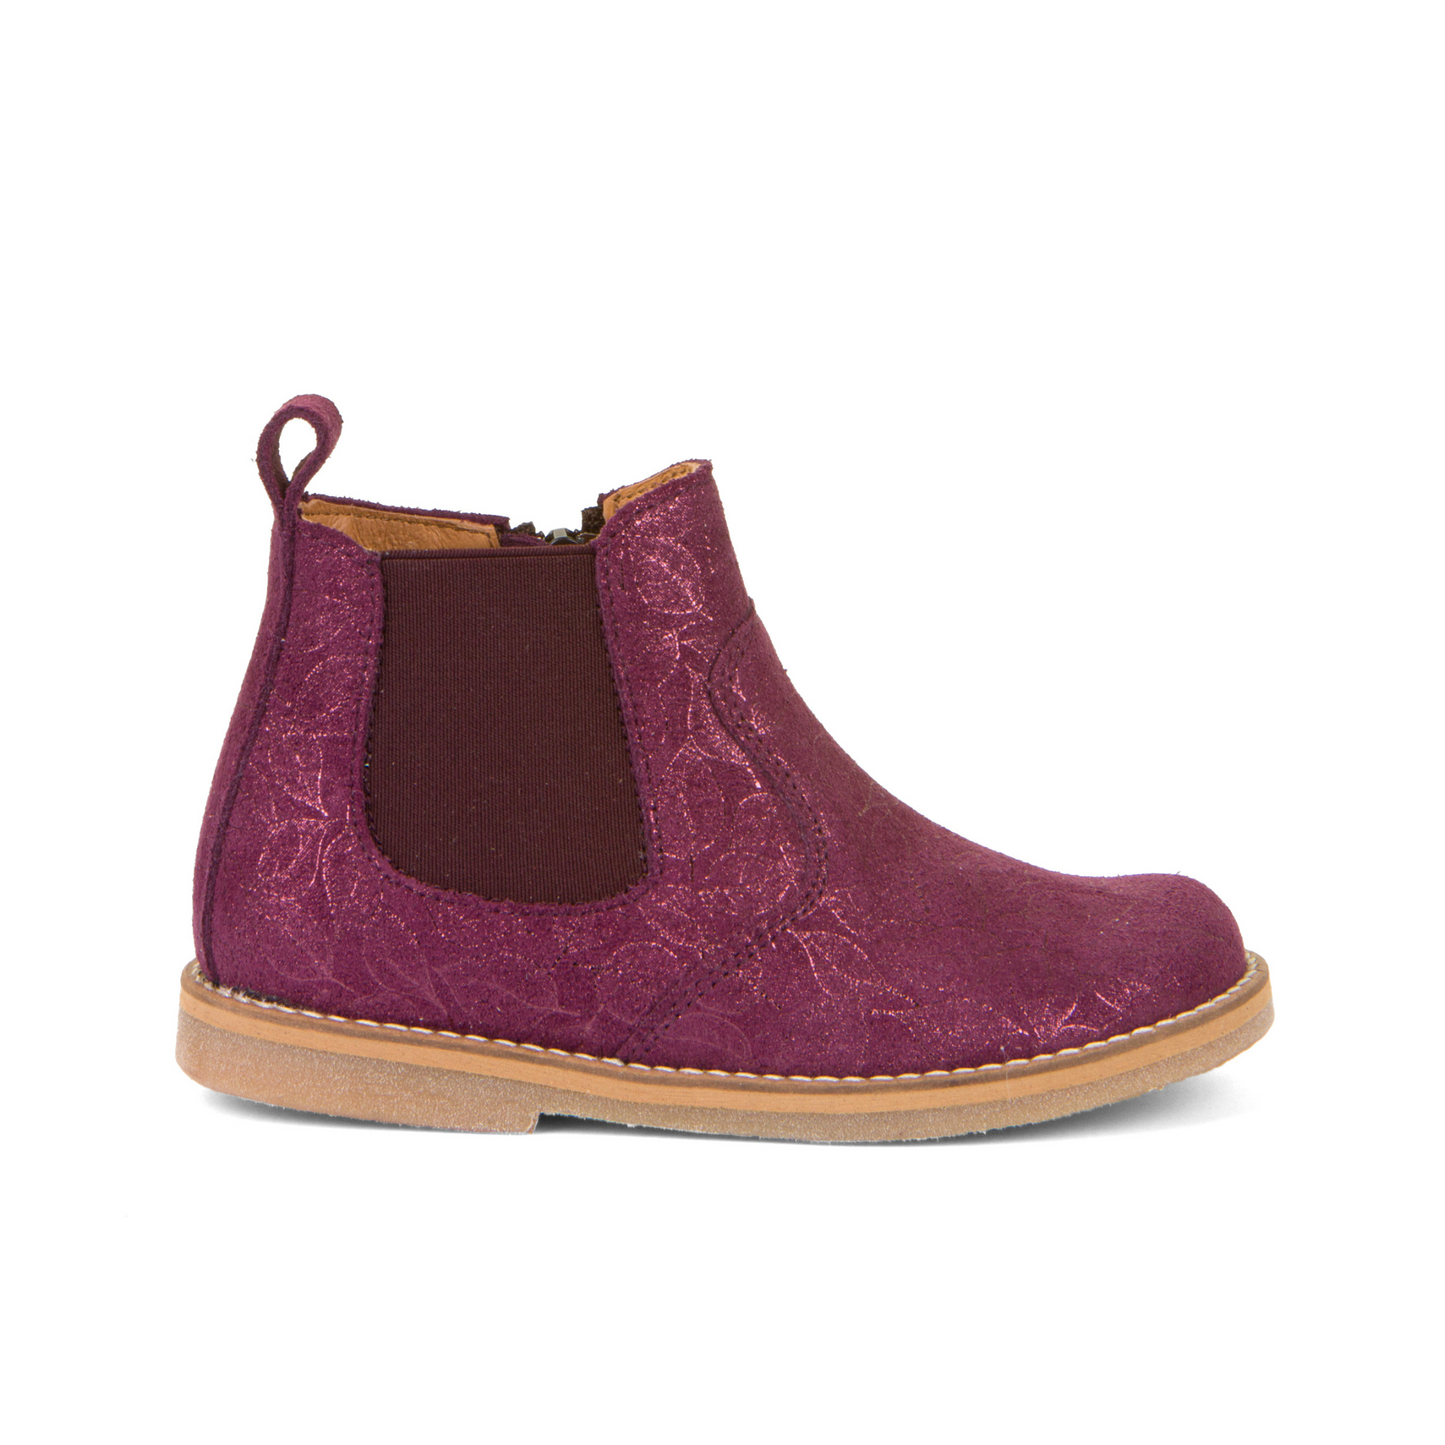 Chelys Low Chelsea Boot in Grape Wine Nubuk Leather